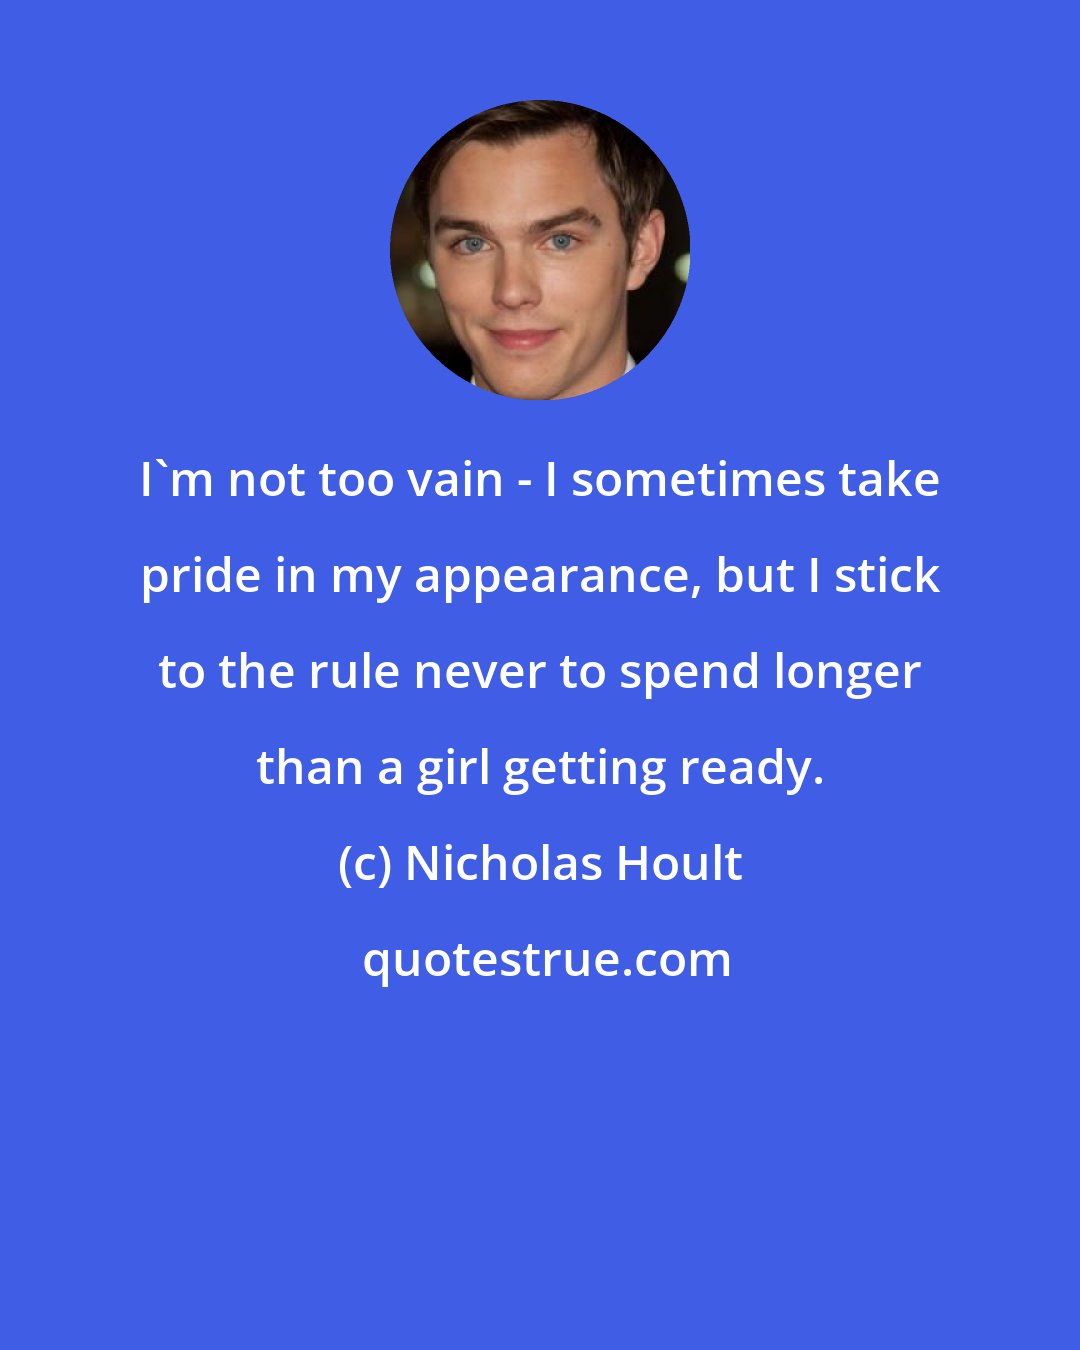 Nicholas Hoult: I'm not too vain - I sometimes take pride in my appearance, but I stick to the rule never to spend longer than a girl getting ready.